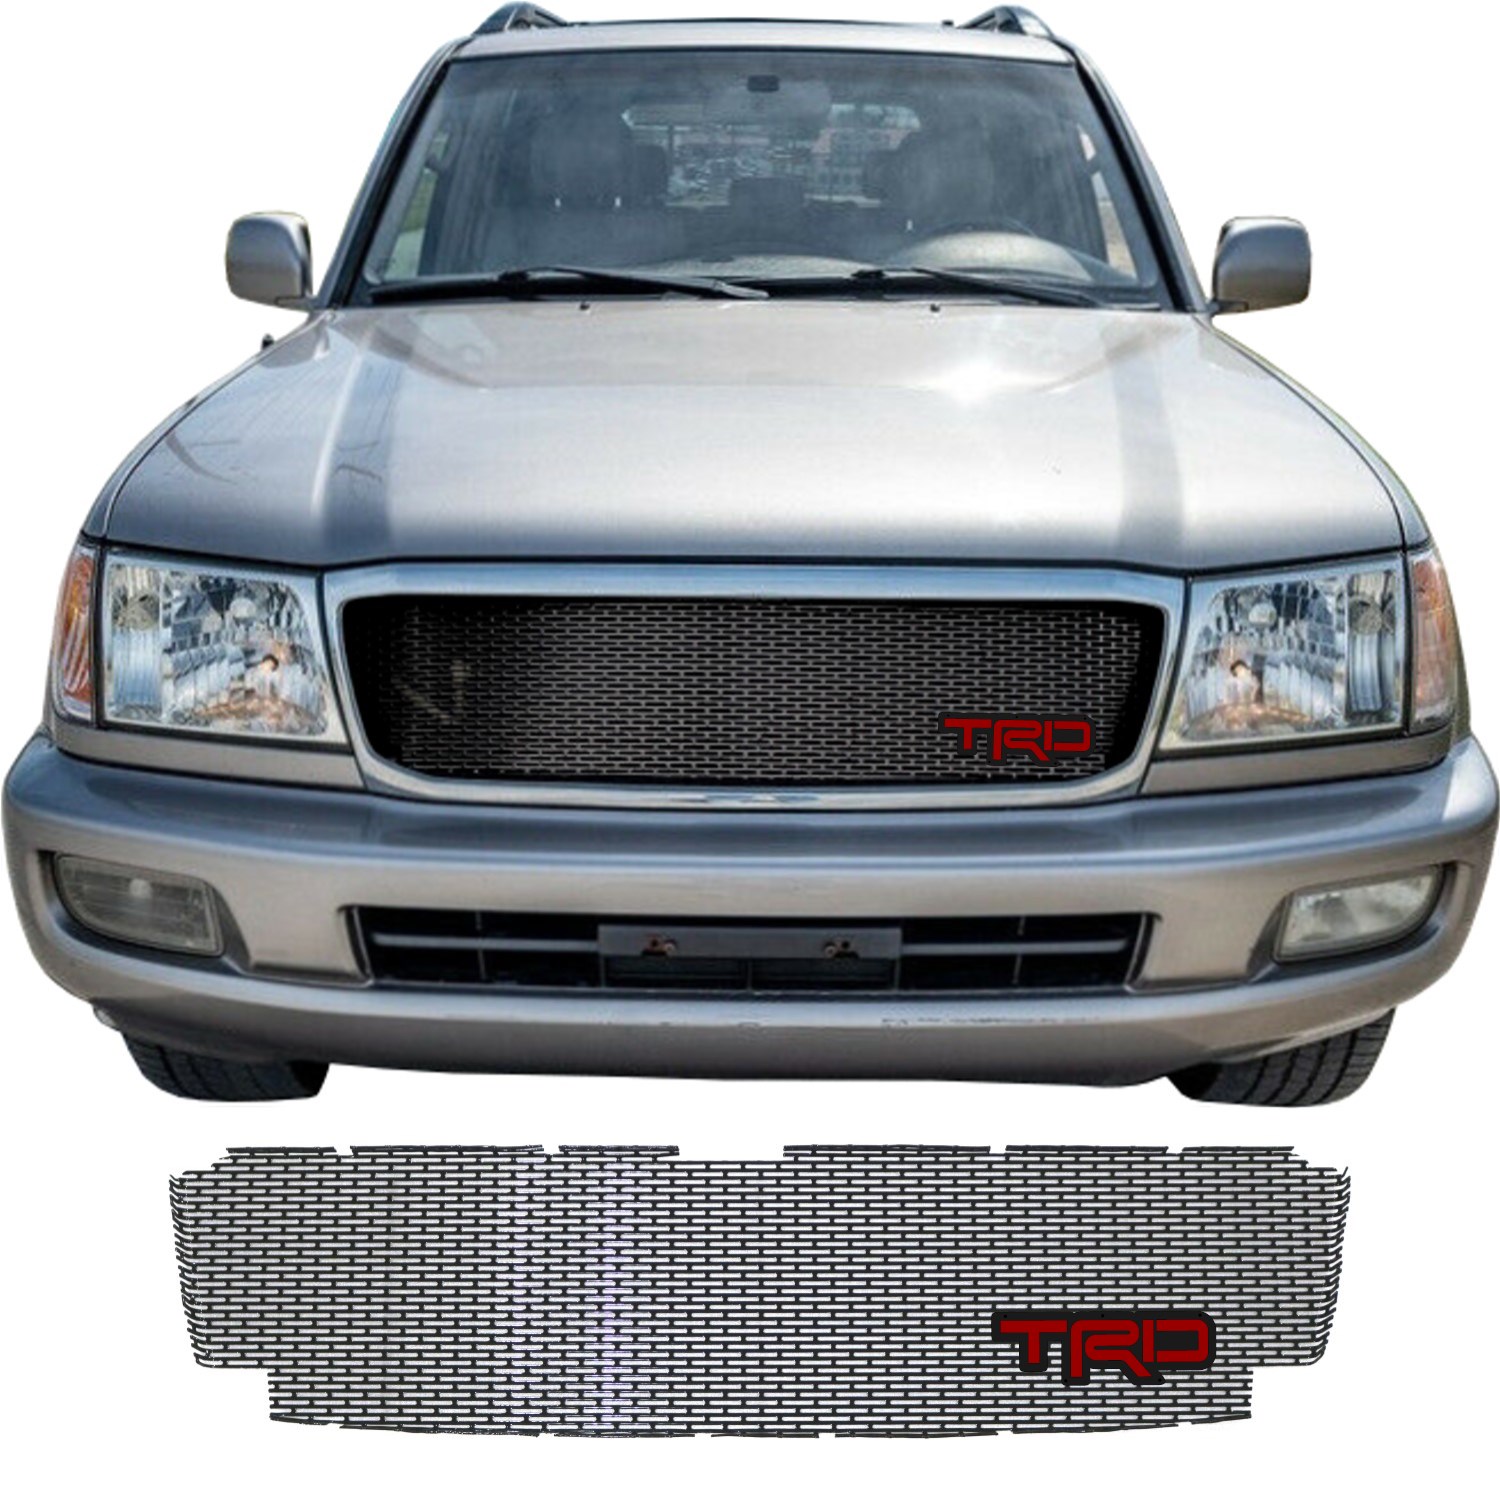 2003 - 2005 Toyota Land Cruiser Series 100 Grill Mesh and TRD Emblem #1